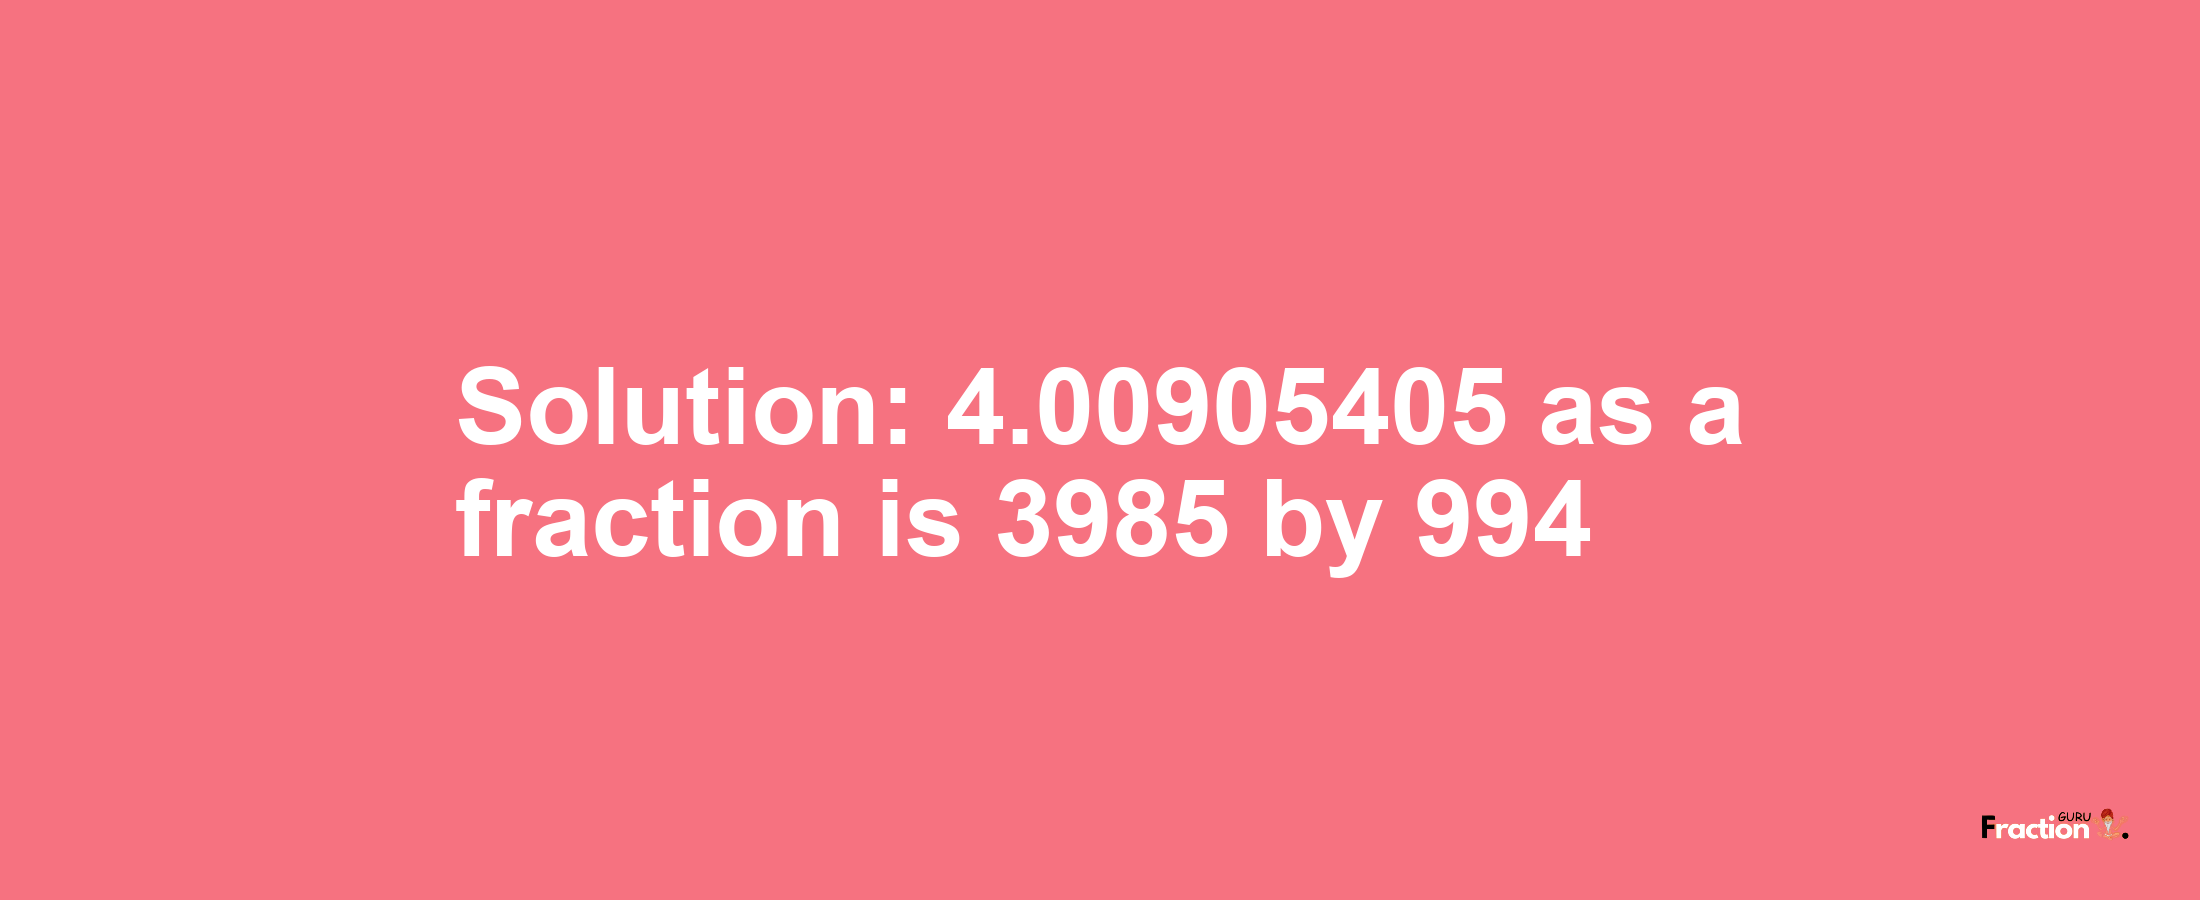 Solution:4.00905405 as a fraction is 3985/994